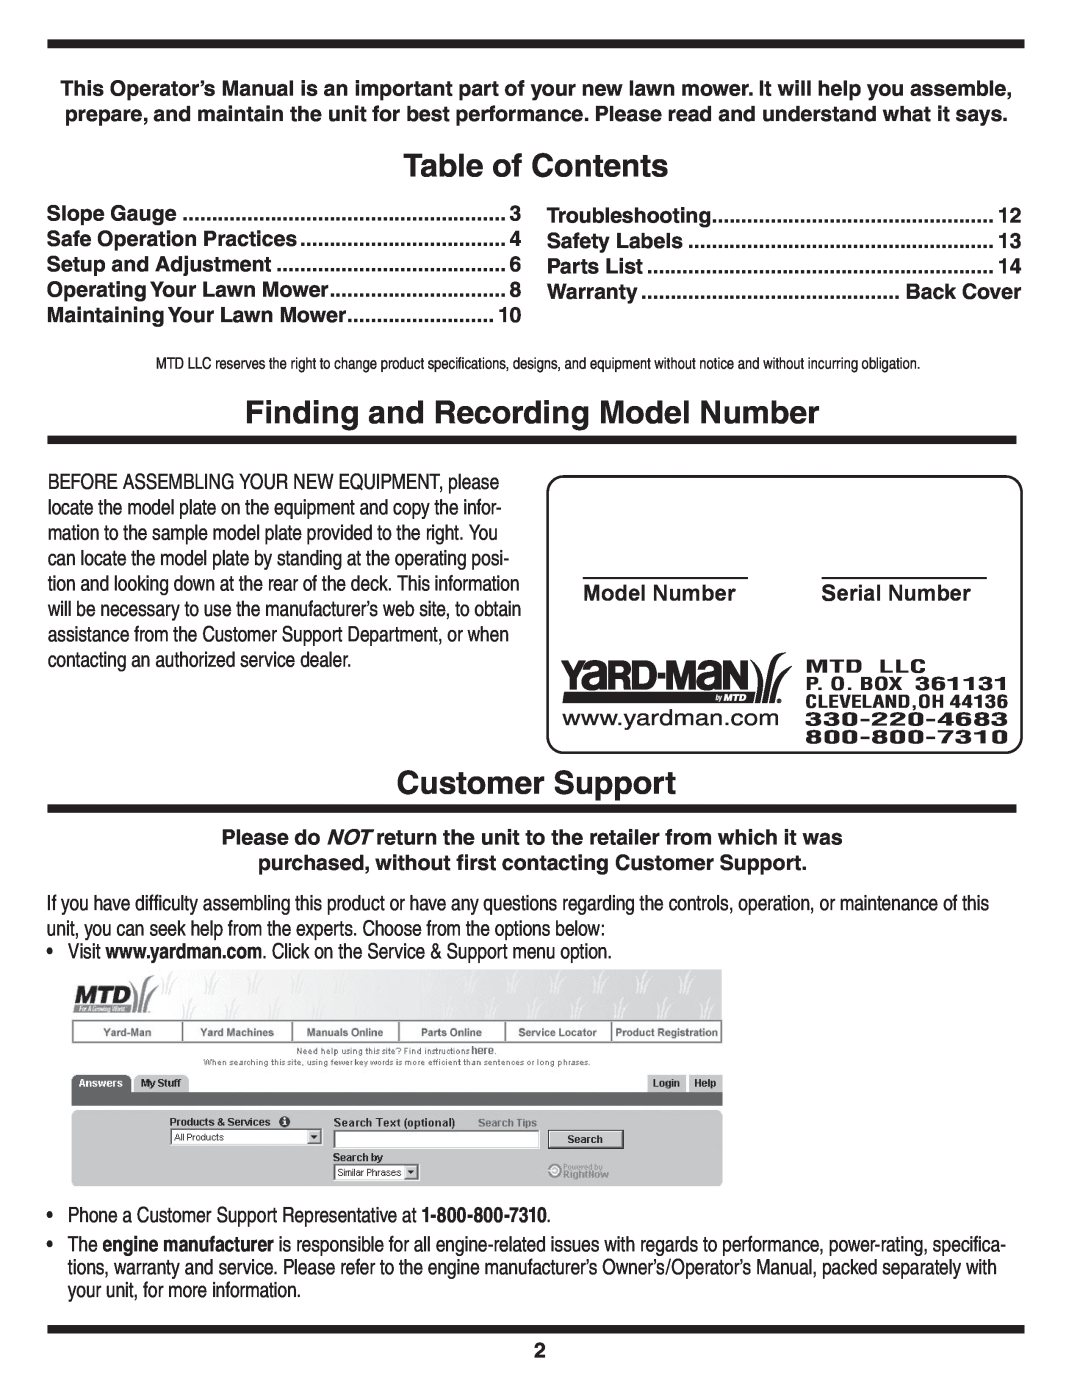 Yard-Man 263 warranty Table of Contents, Finding and Recording Model Number, Customer Support, Serial Number 